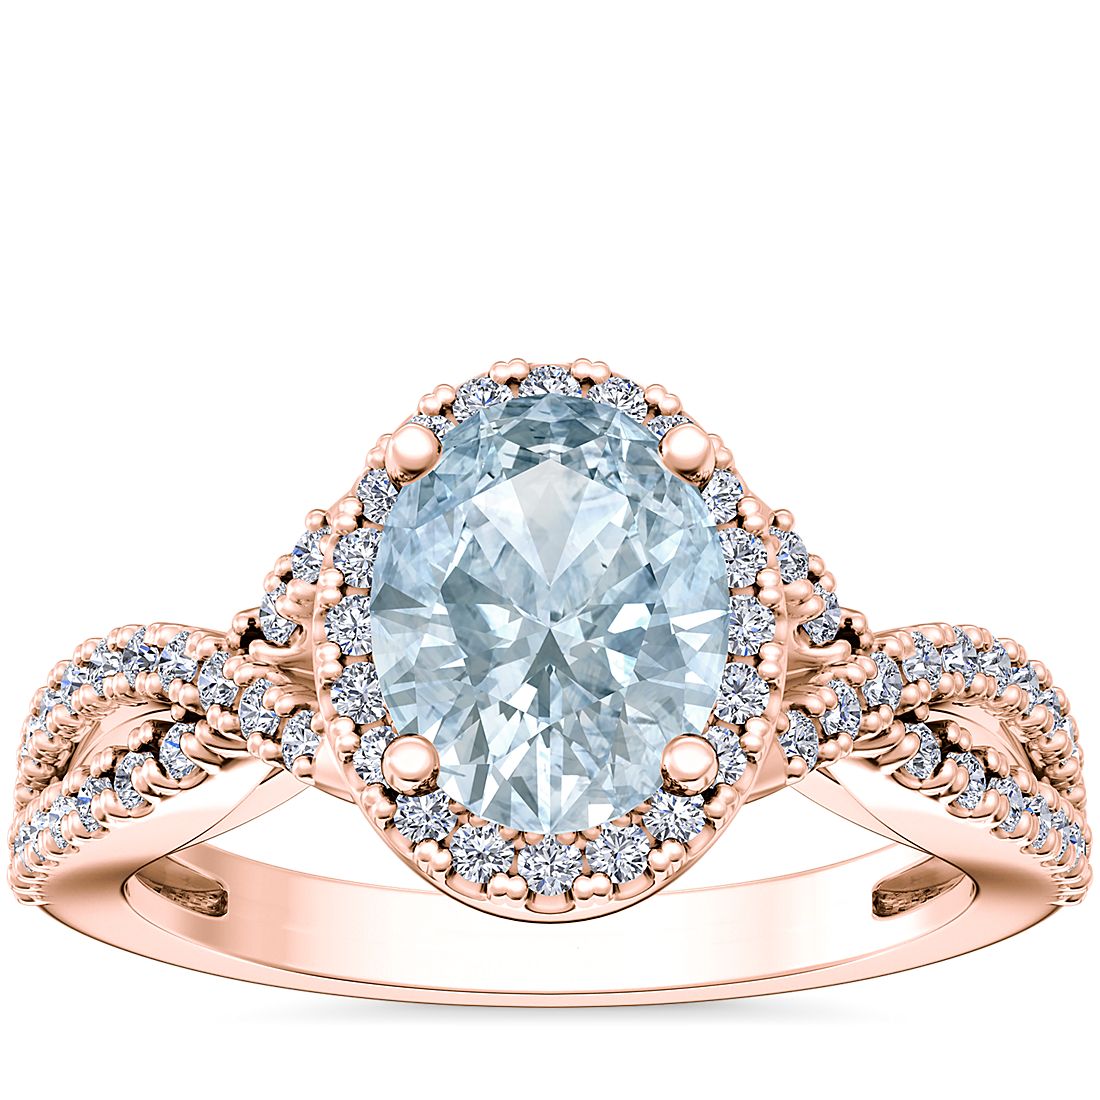 Twist Halo Diamond Engagement Ring with Oval Aquamarine in 14k Rose Gold (9x7mm)